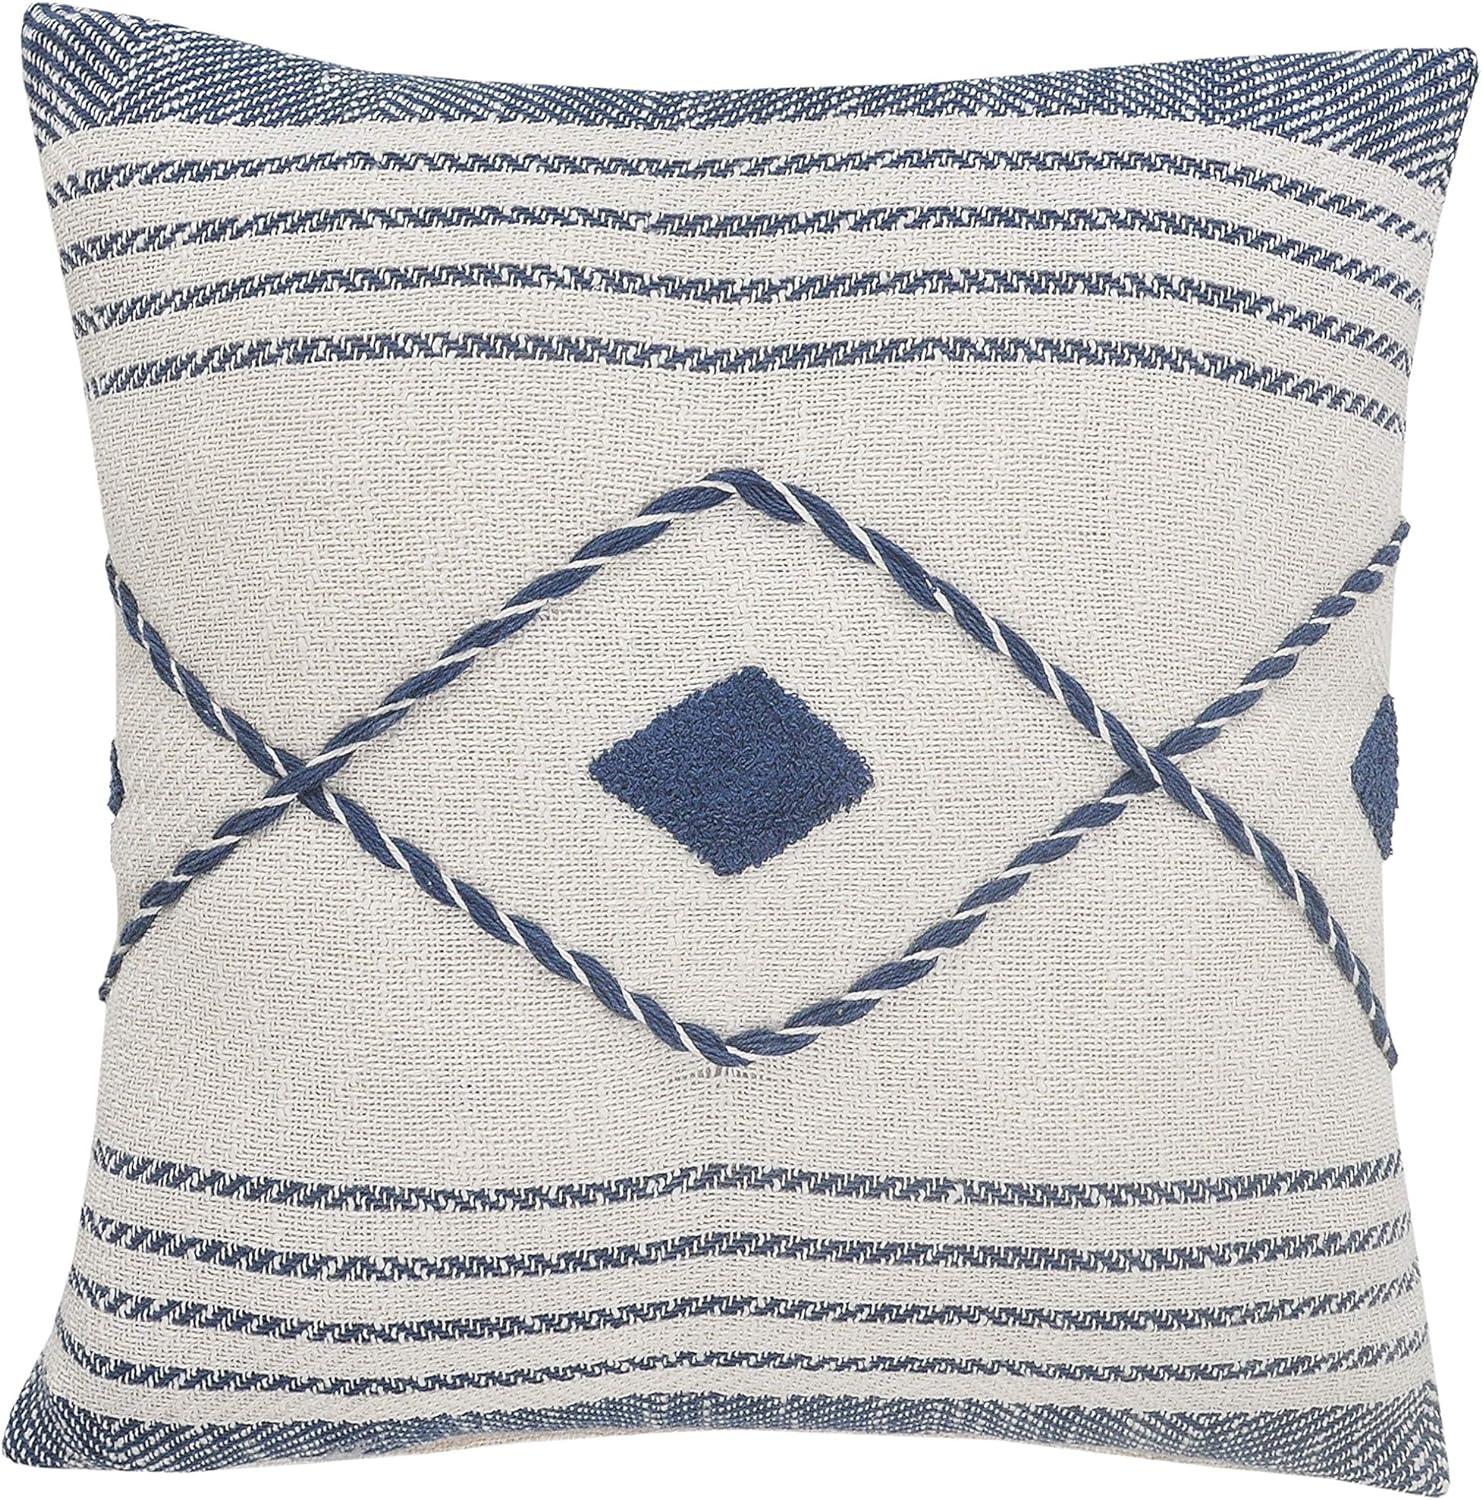 Seaside Serenity 20" Square Hand-Woven Geometric Cotton Throw Pillow Cover